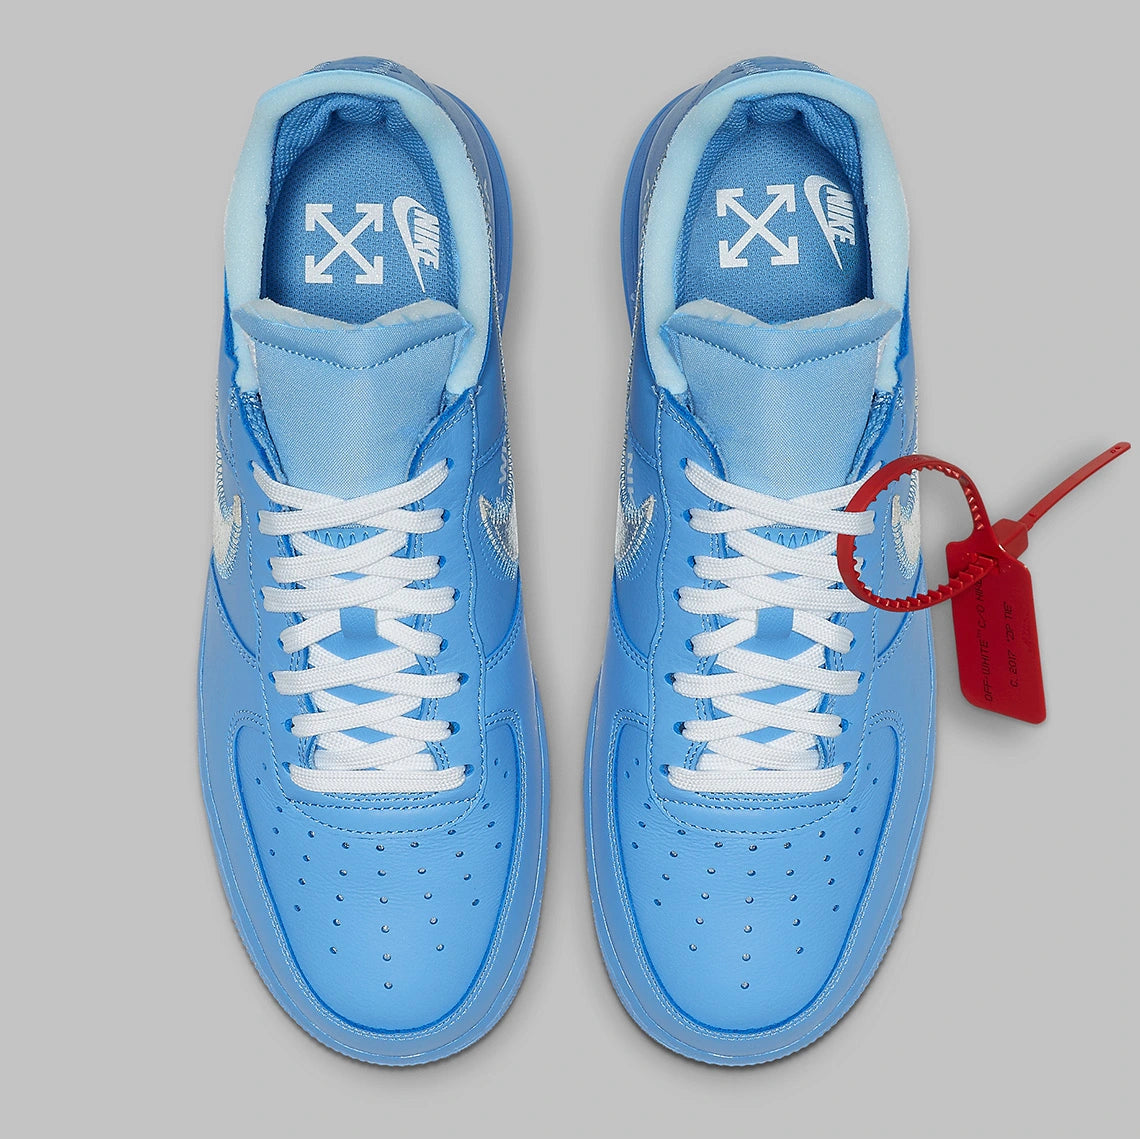 Nike Air Force 1 Low Off White MCA University Blue